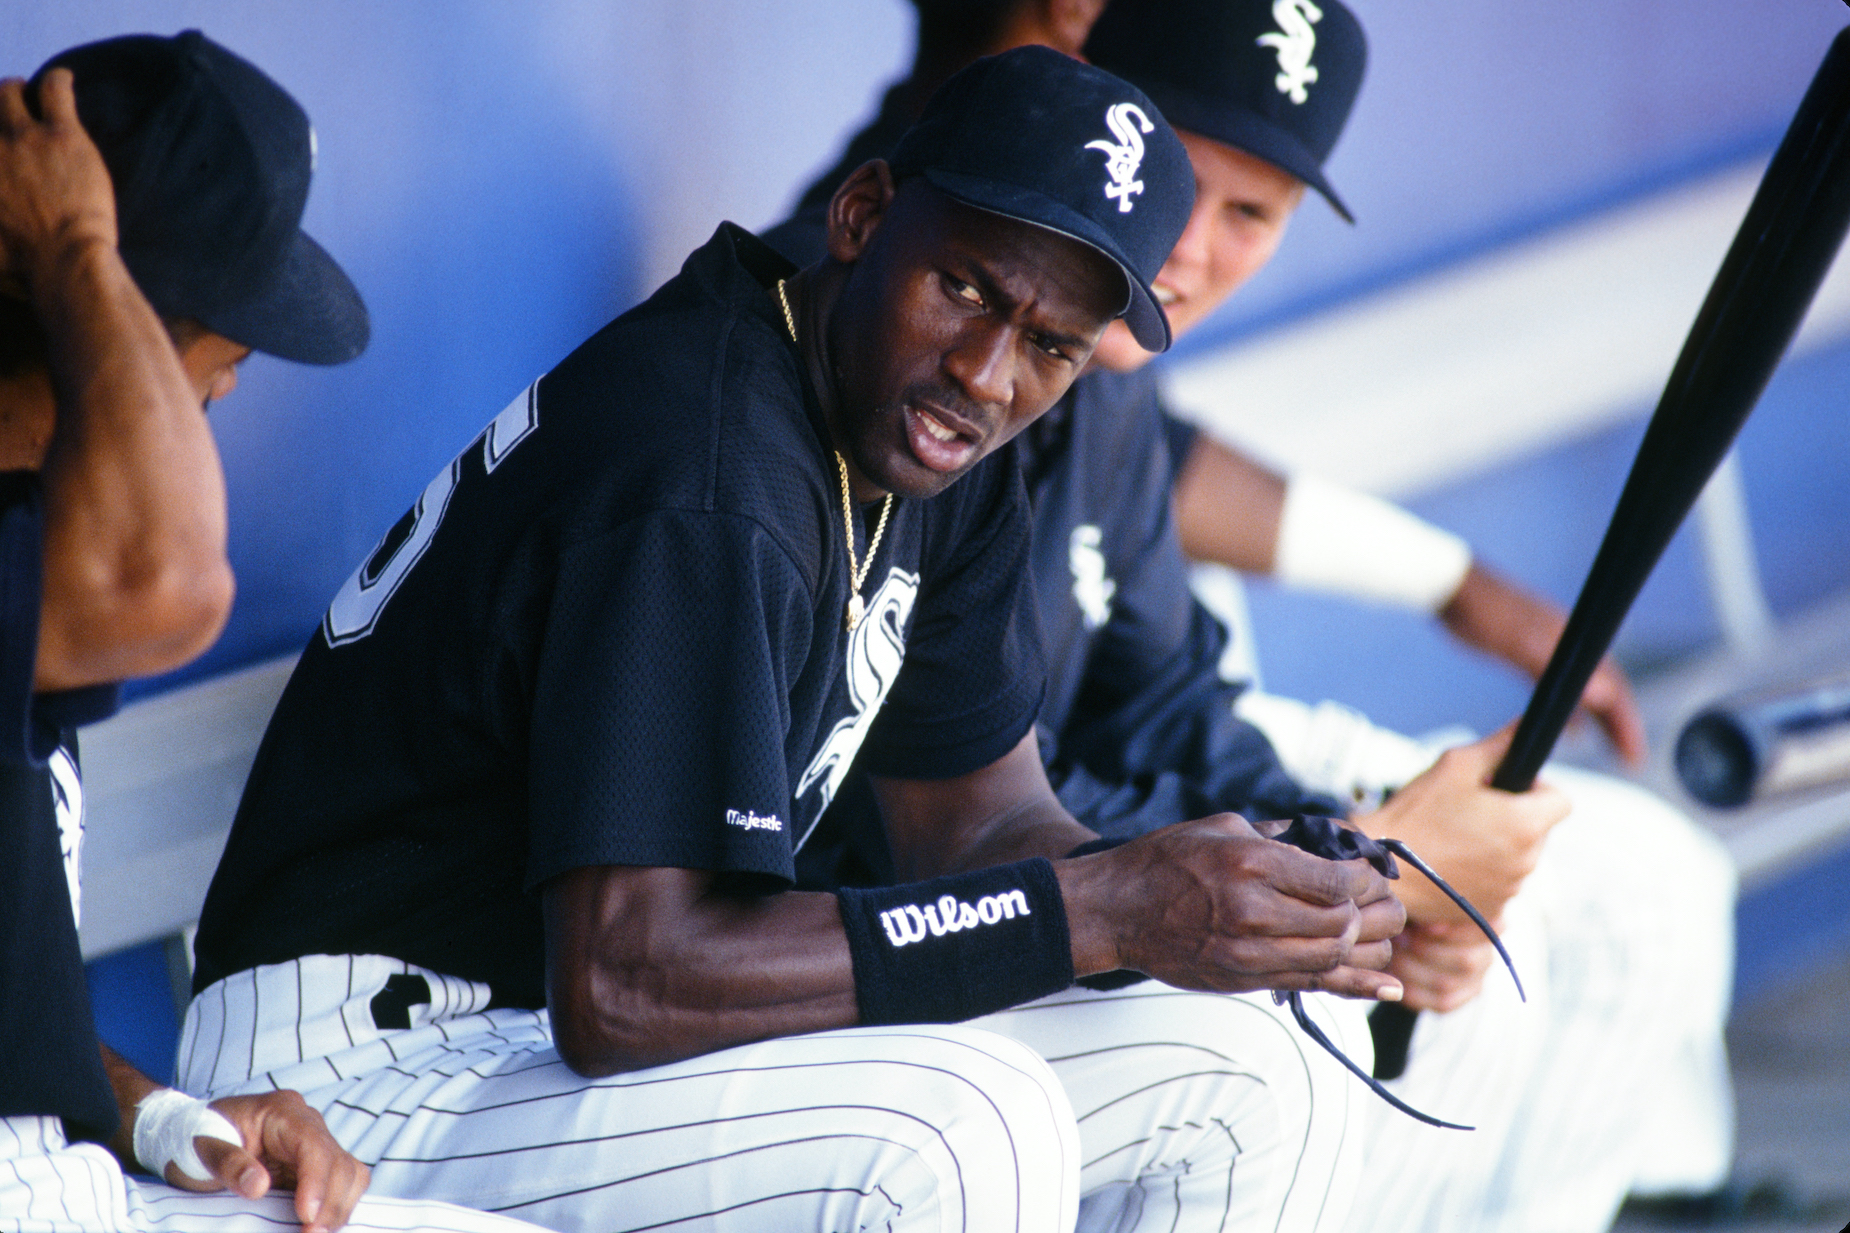 Michael Jordan as a member of the Chicago White Sox during his brief baseball career.